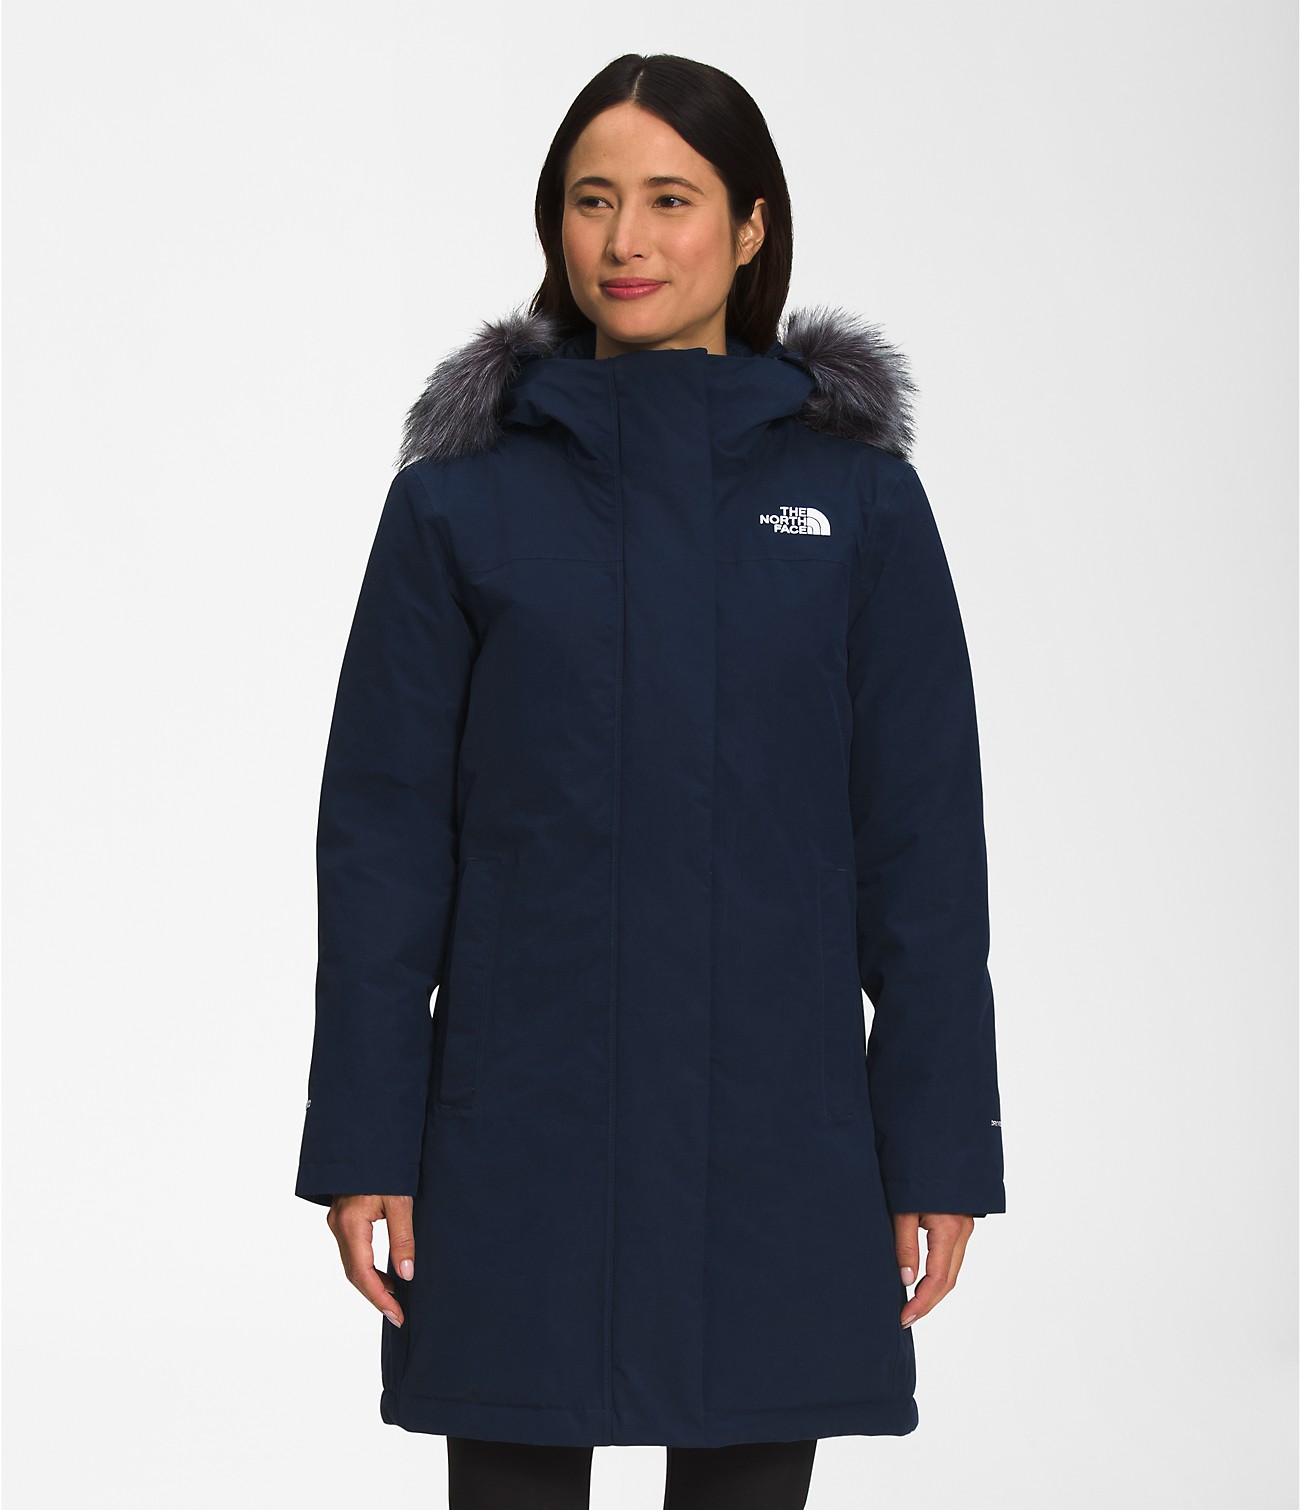 Unlock Wilderness' choice in the Marmot Vs North Face comparison, the Arctic Parka by The North Face